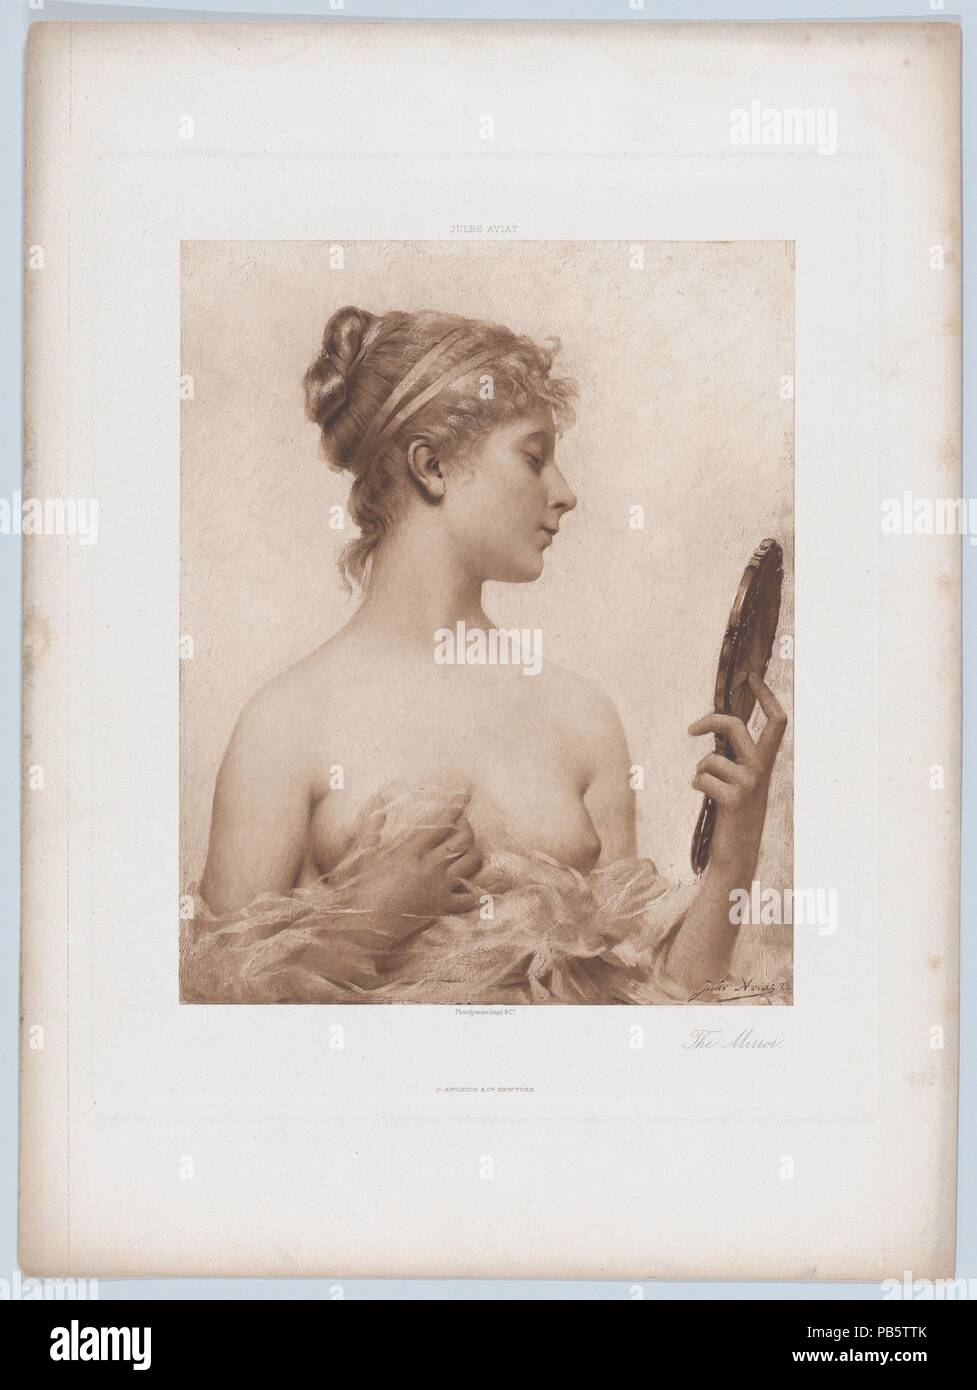 The Mirror. Artist: After Jules Aviat (French, Brienne-le-Château 1844-1931 Périgueux). Dimensions: Sheet: 15 7/8 × 11 7/8 in. (40.3 × 30.1 cm)  Plate: 12 3/16 × 9 13/16 in. (31 × 25 cm). Printer: Goupil & Co.. Publisher: D. Appleton & Co. (New York, NY). Date: 1890.  One of two hundred and twenty five photogravures from copper plates by Groupil & Co. from 'IDEALS OF LIFE IN FRANCE or, How The Great Painters Portray Woman In French Art' by Geroge Sheldon, published by Appleton & Co., New York, 1890. This photogravure is after Jules Aviat's 'The Mirror'. Museum: Metropolitan Museum of Art, New  Stock Photo